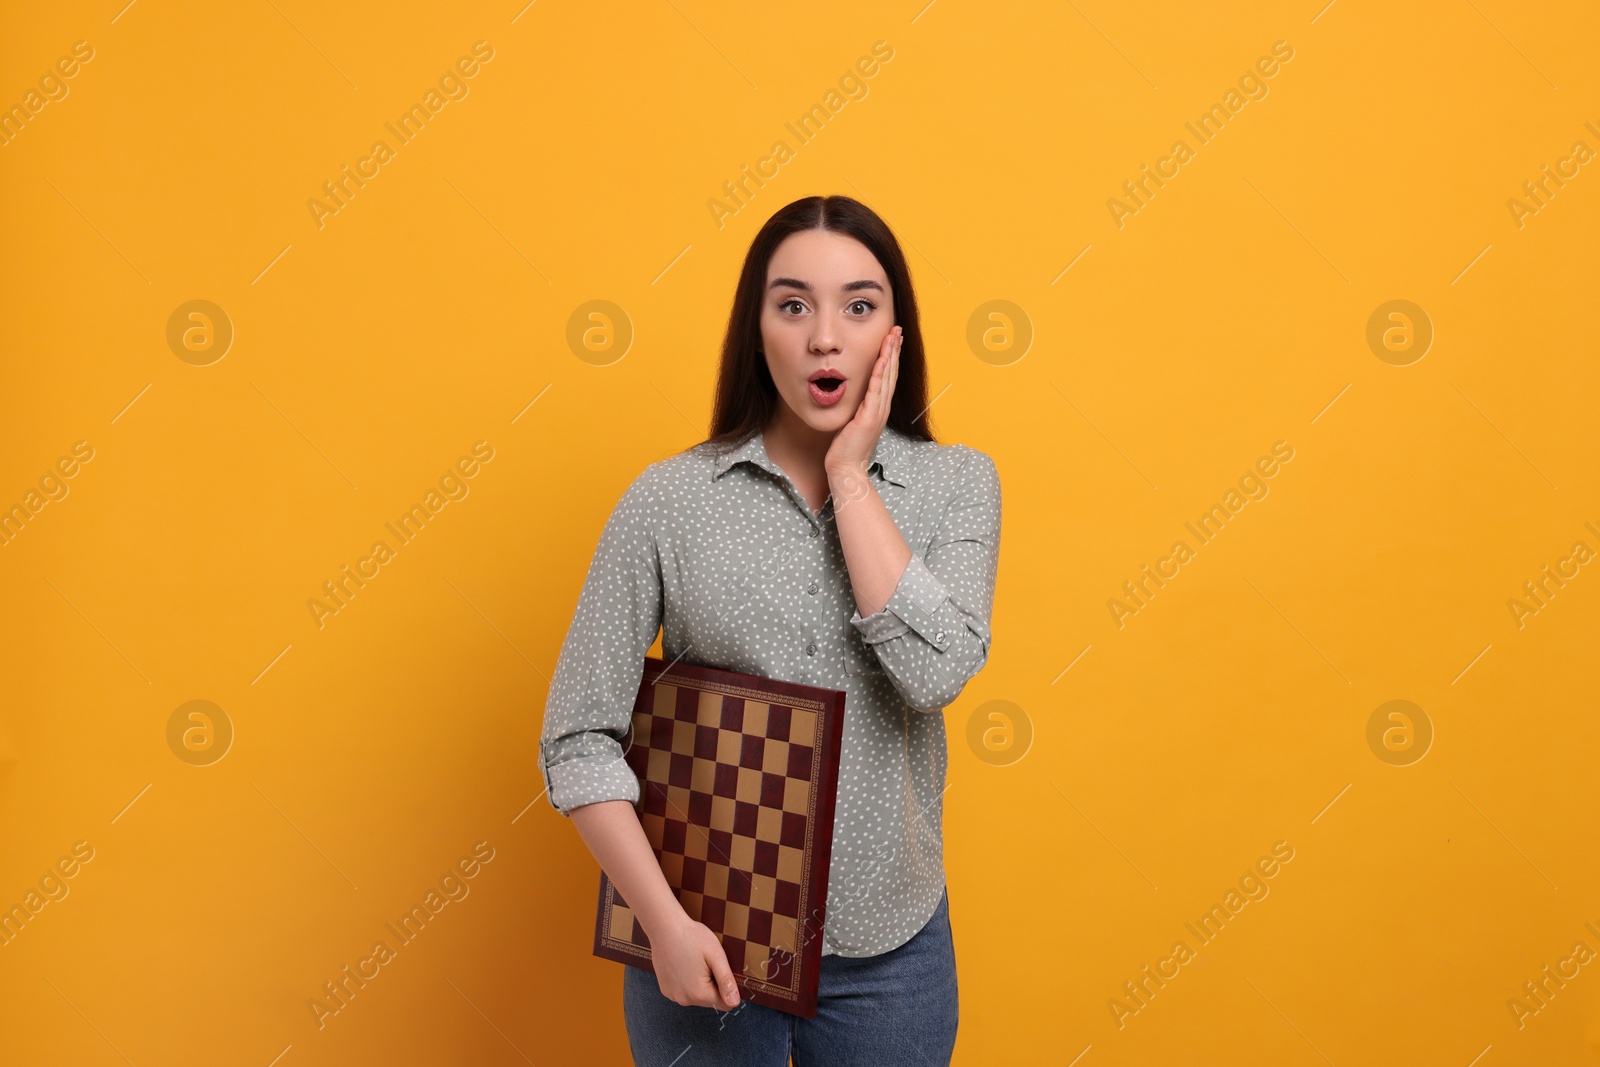 Photo of Emotional woman with chessboard on orange background